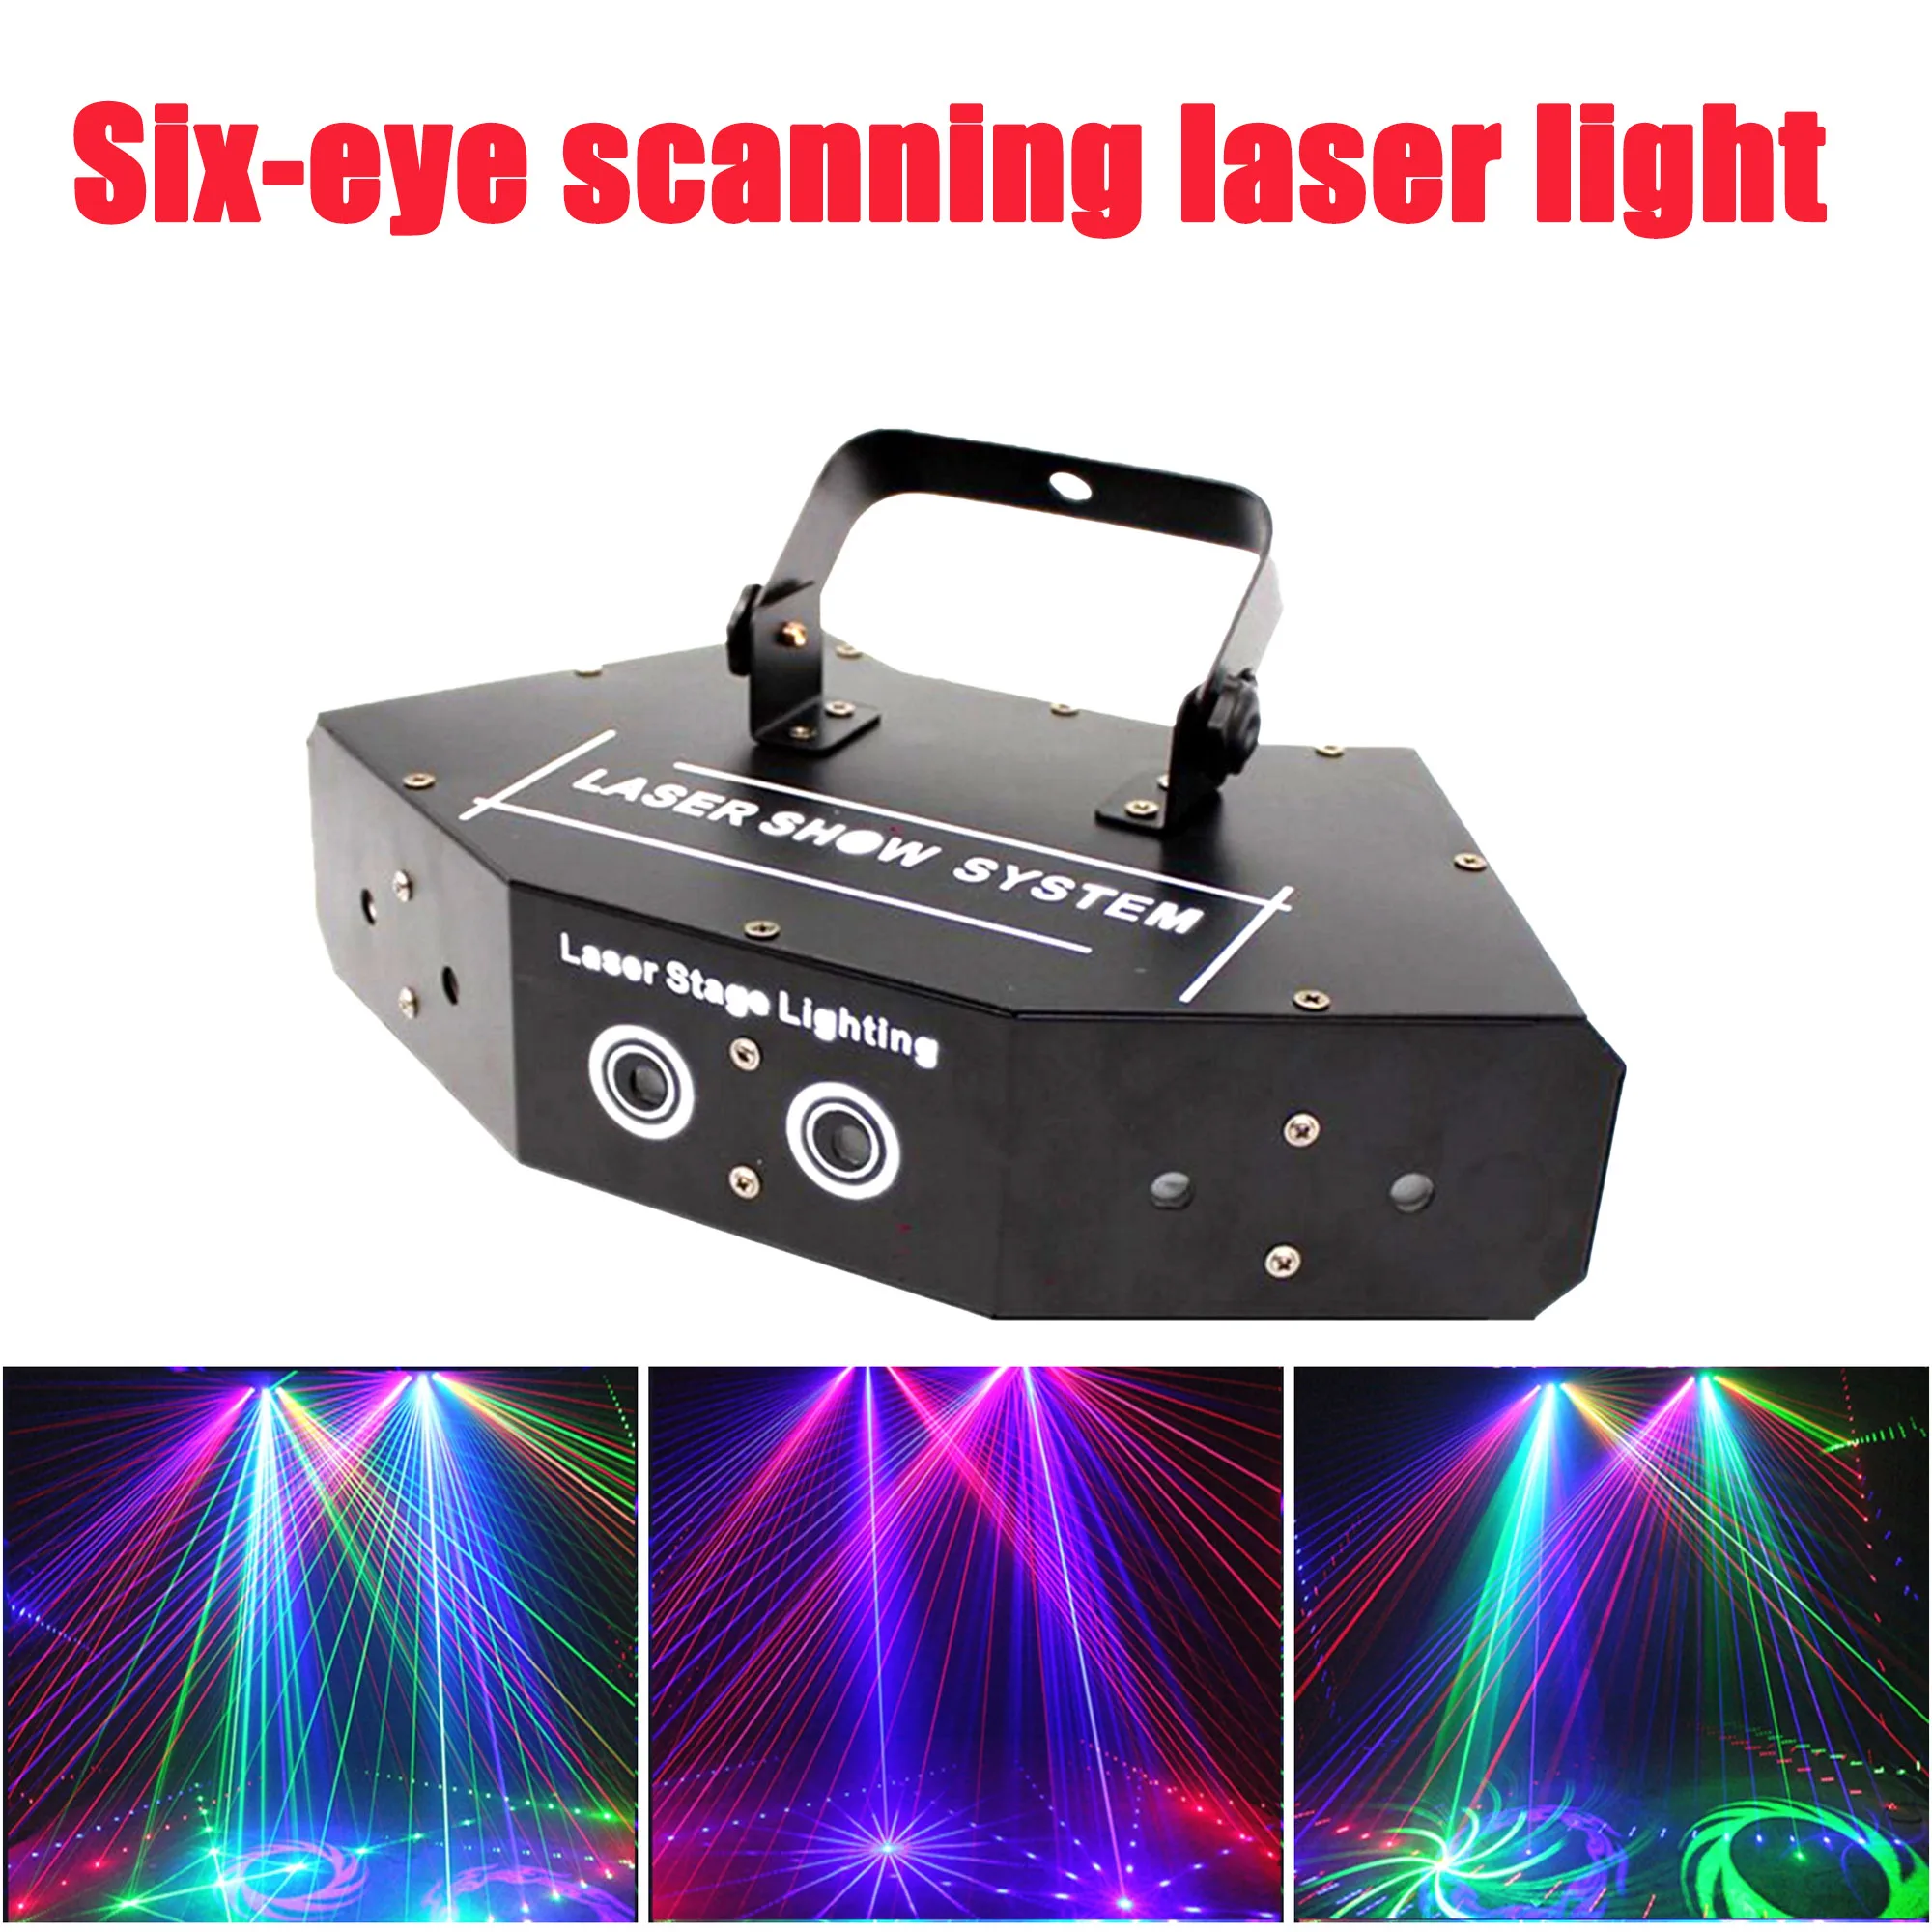 Fan-shaped six eyes scanning RGB laser light for DJ disco club stage effect lighting with voice control party lights